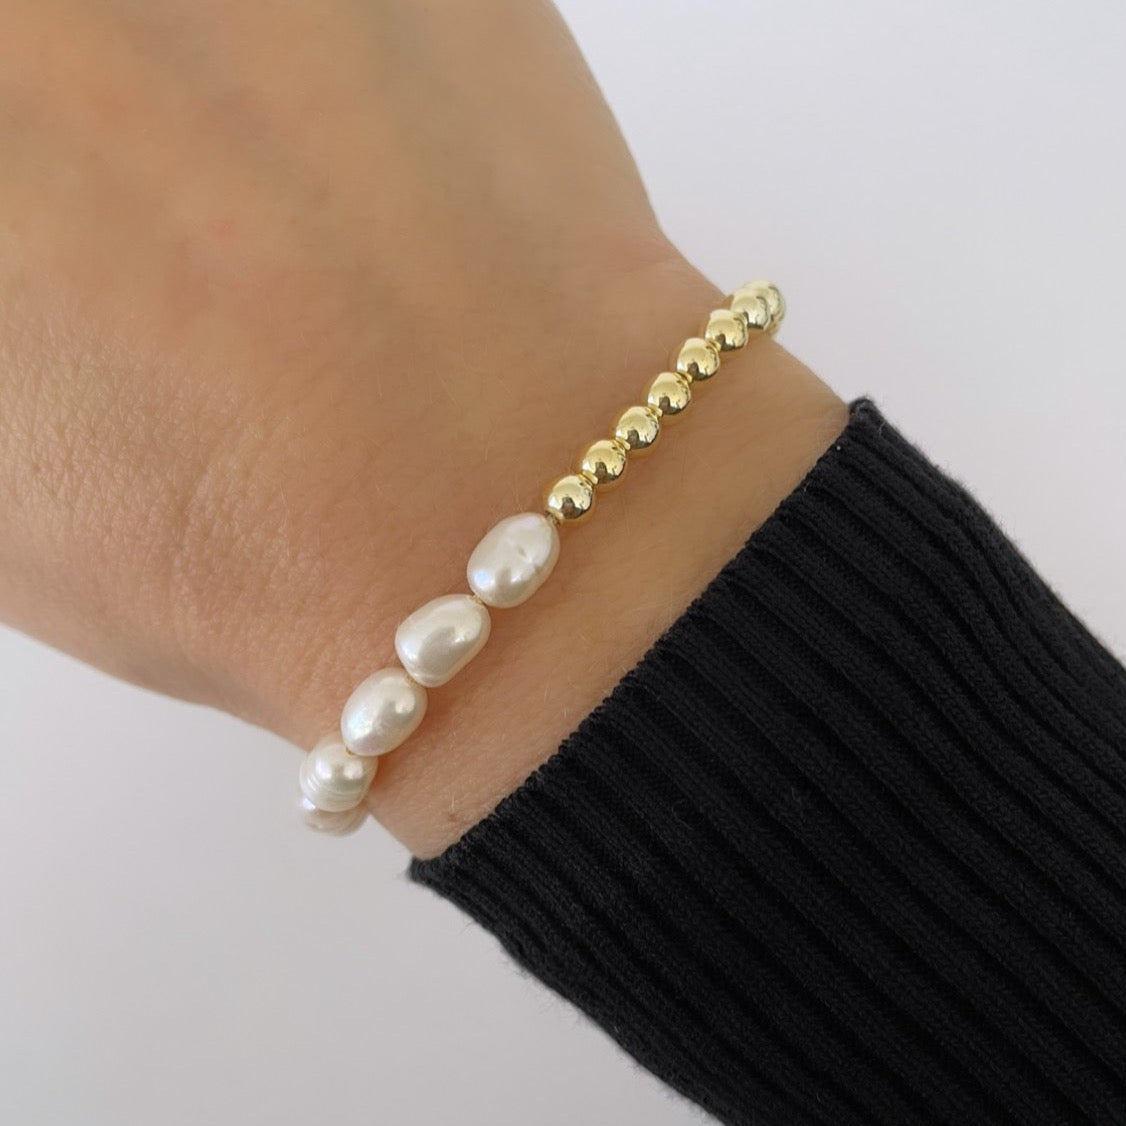 Pearl and Gold Bead Bracelet - LimaLimón Store